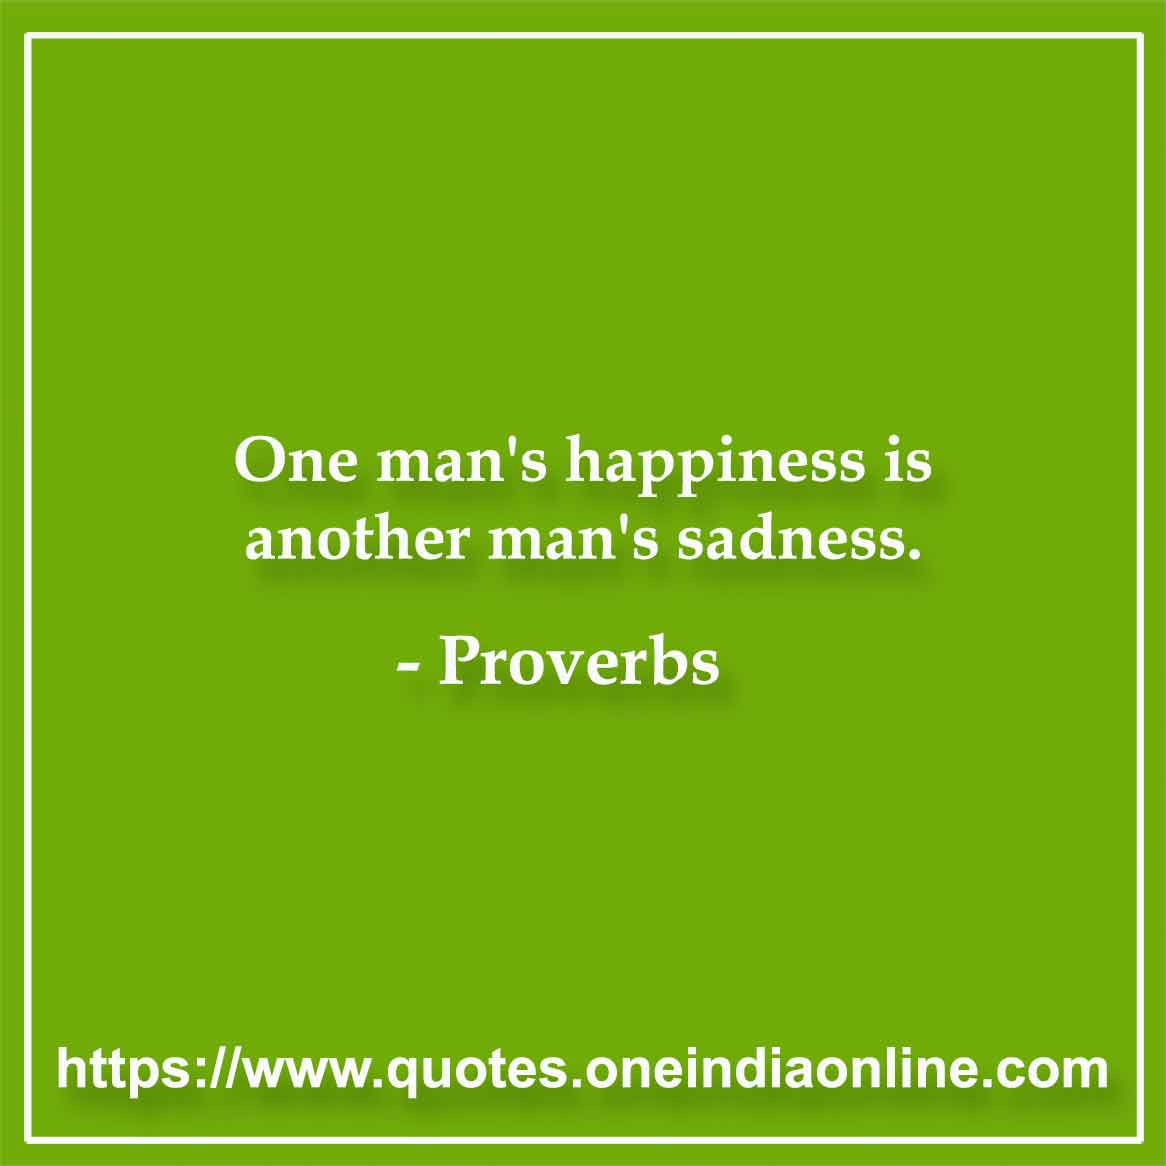 One man's happiness is another man's sadness.

Brazilian Proverbs